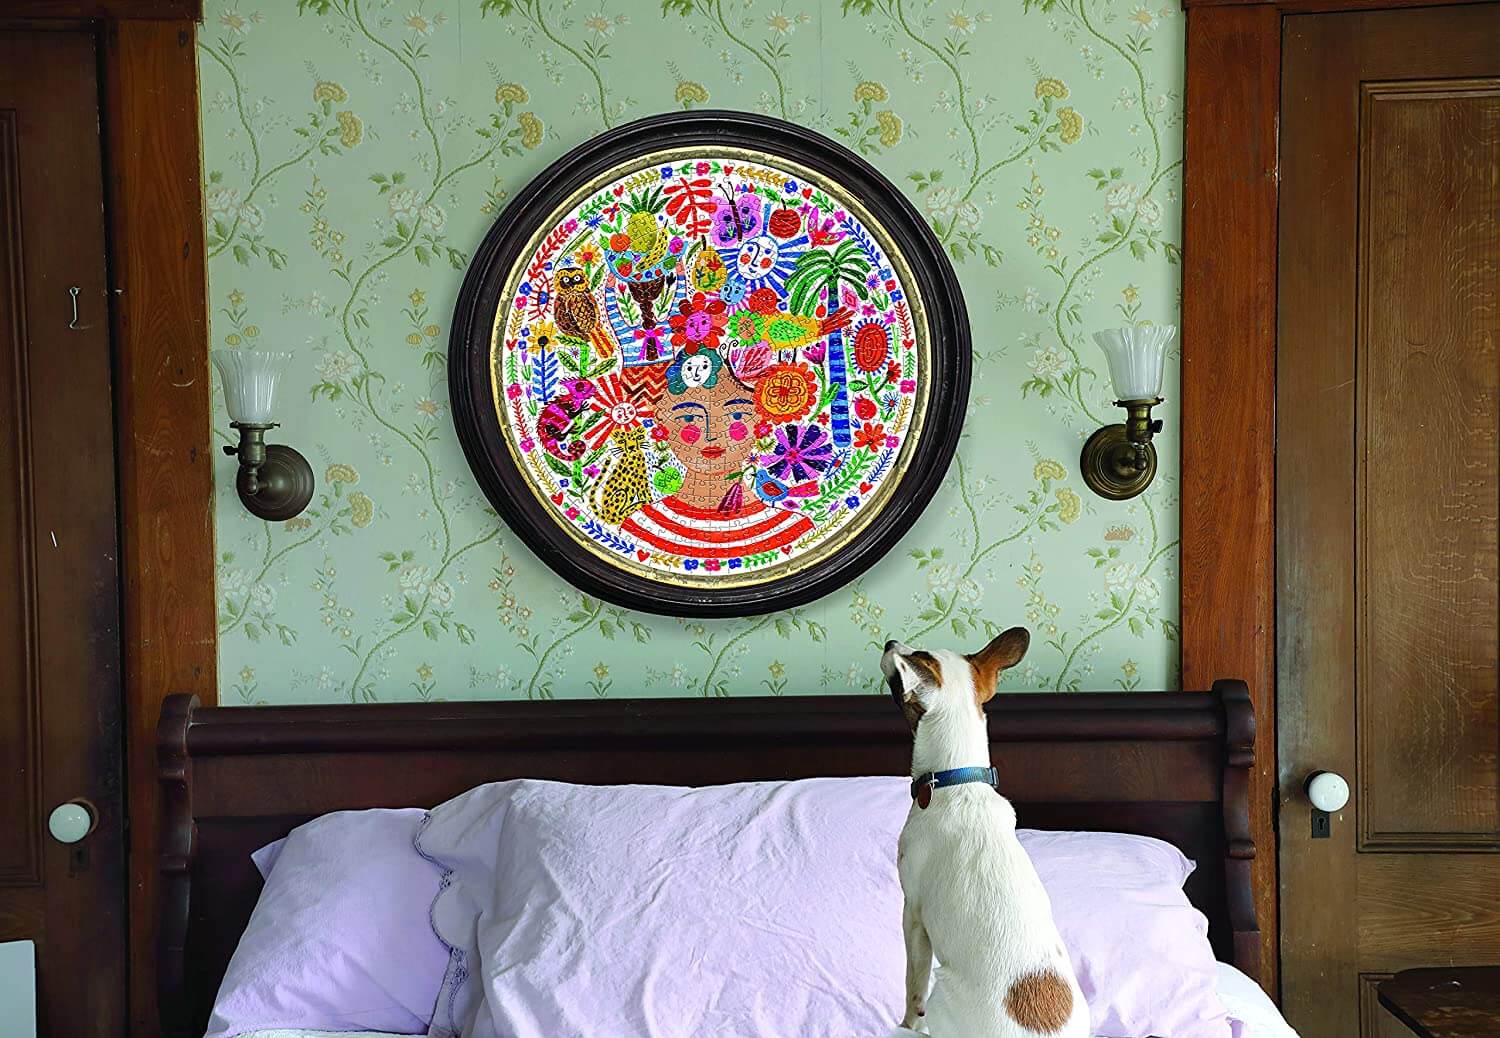 eeBoo - Piece and Love Positivity 500 Piece Round Circle Jigsaw Puzzle photo of completed puzzle in a frame hanging on the wall over a bed with a dog sitting on the bed looking at the puzzle